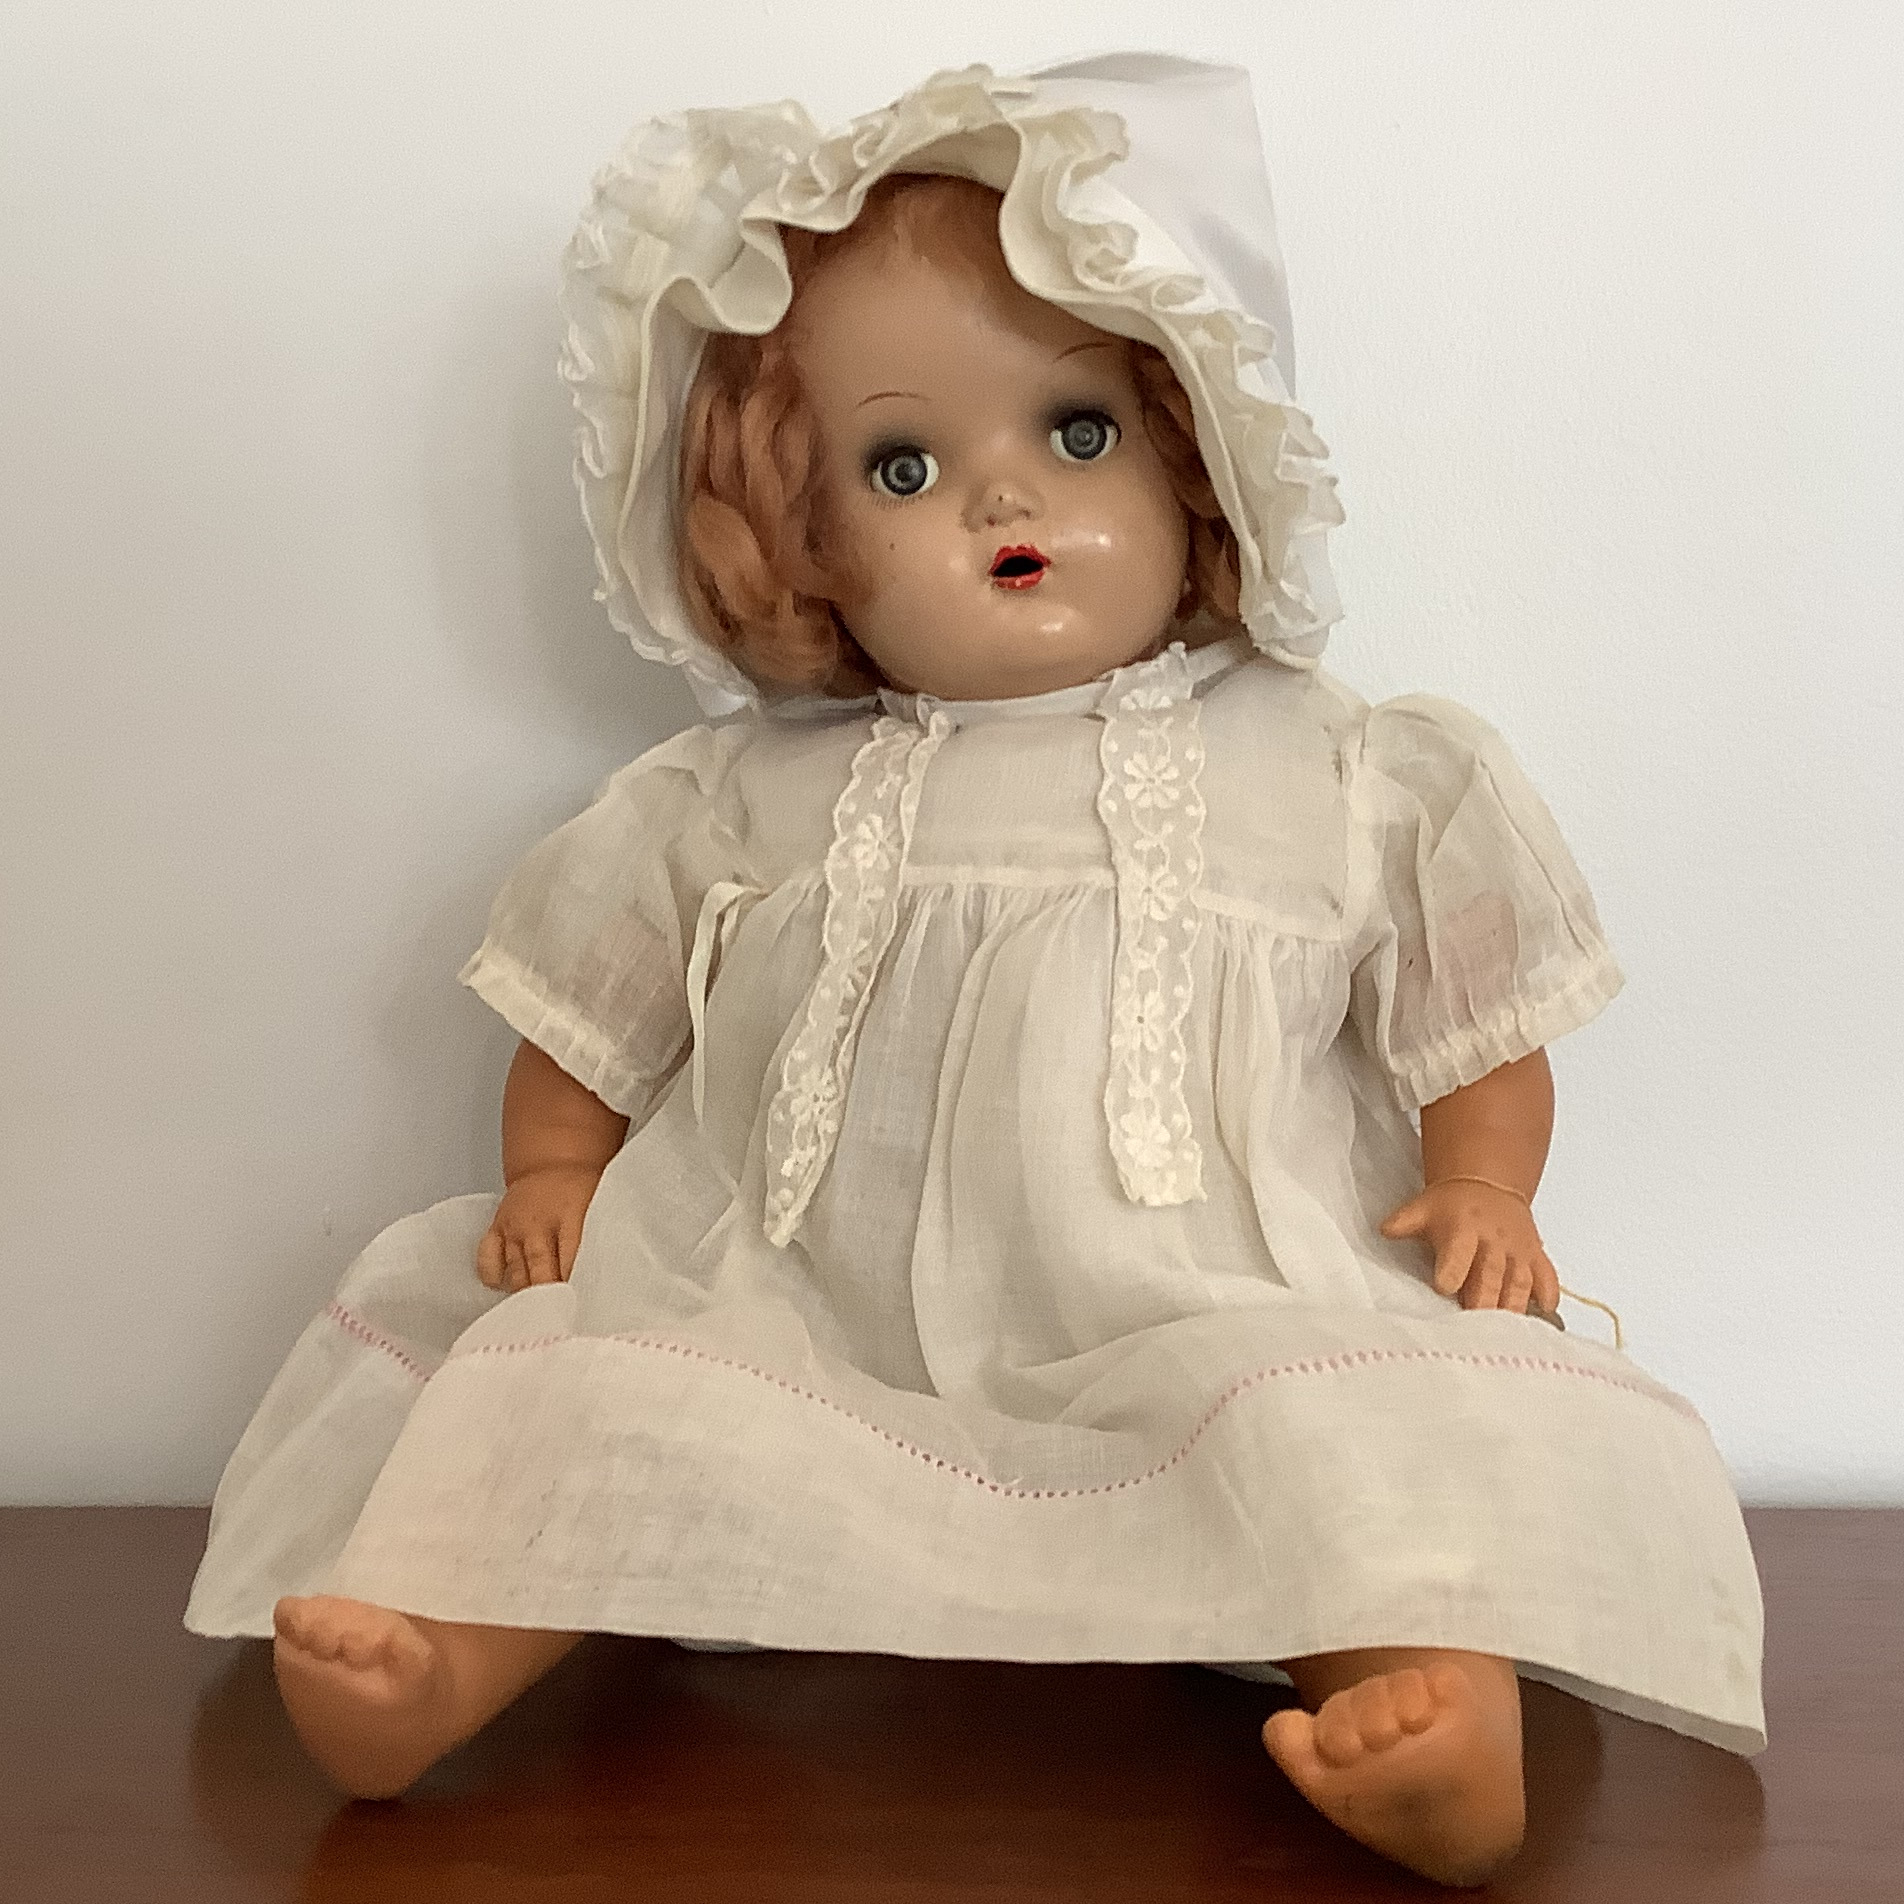 Strawberry blonde vintage baby doll in sheer white cotton bonnet and dress, with sleep eyes and significant eye makeup